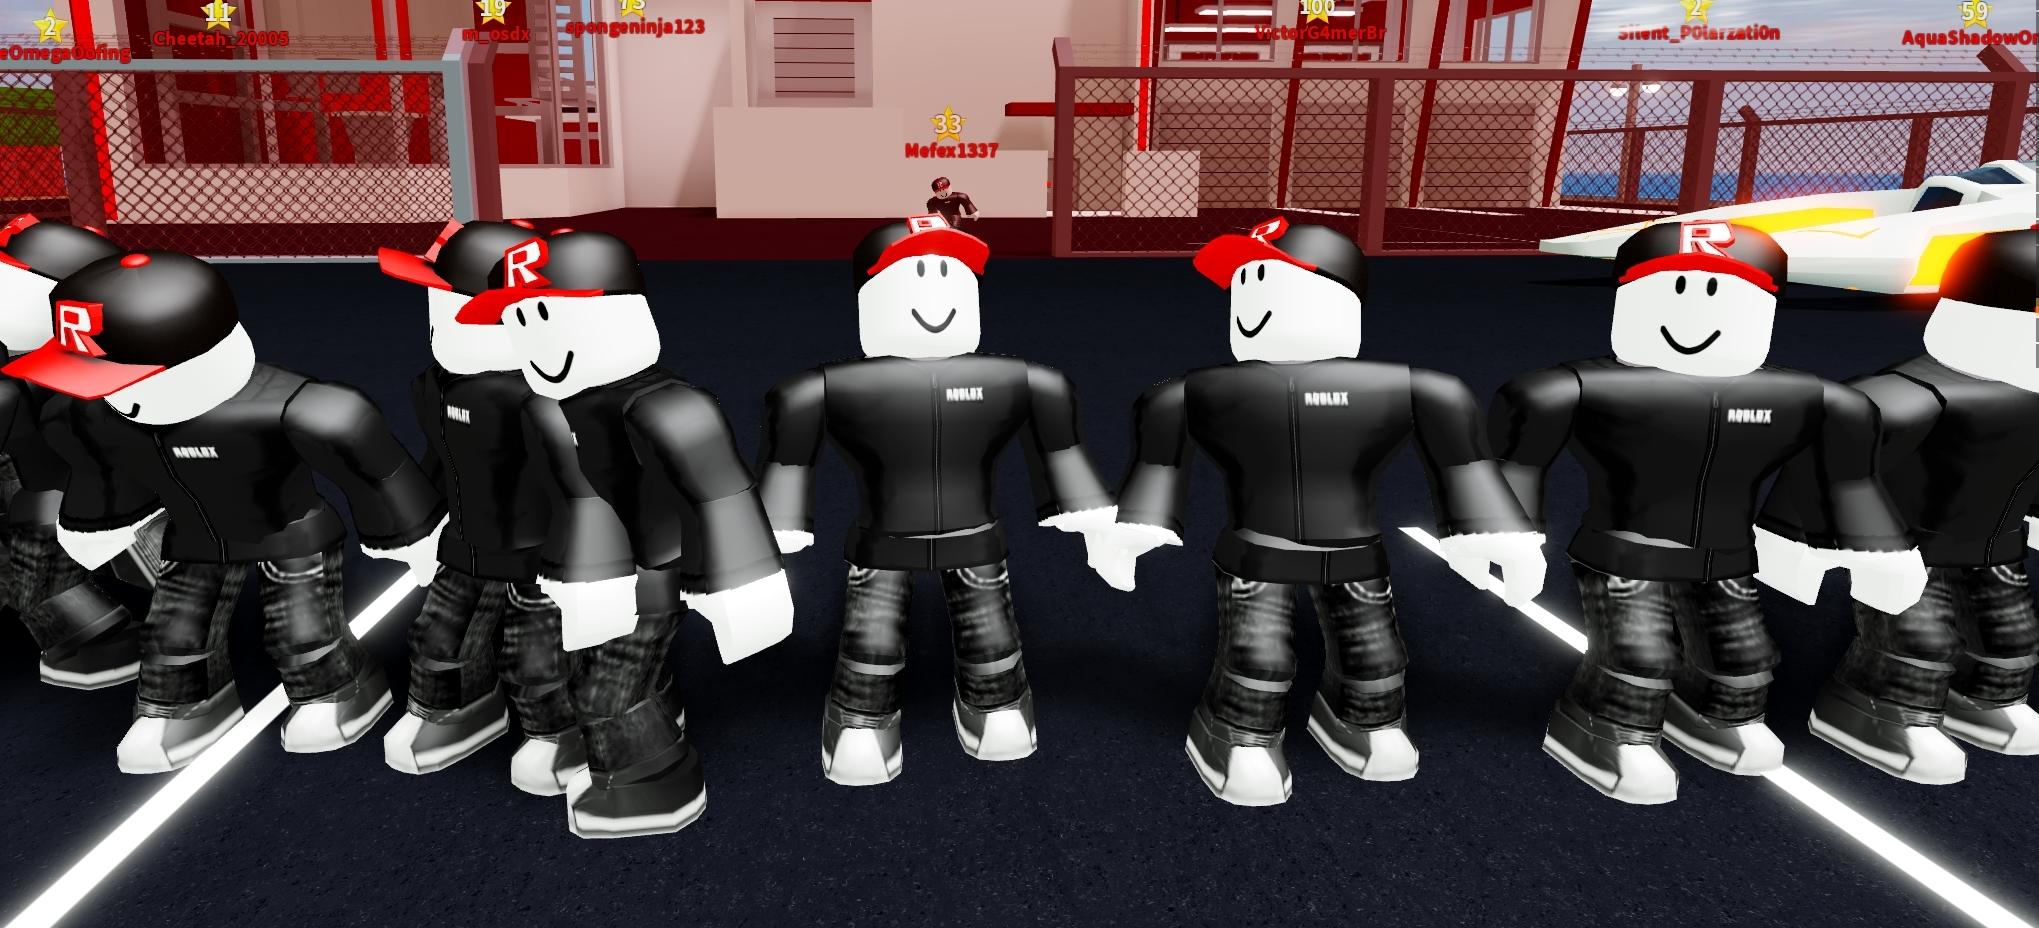 If ROBLOX Removed Guests 